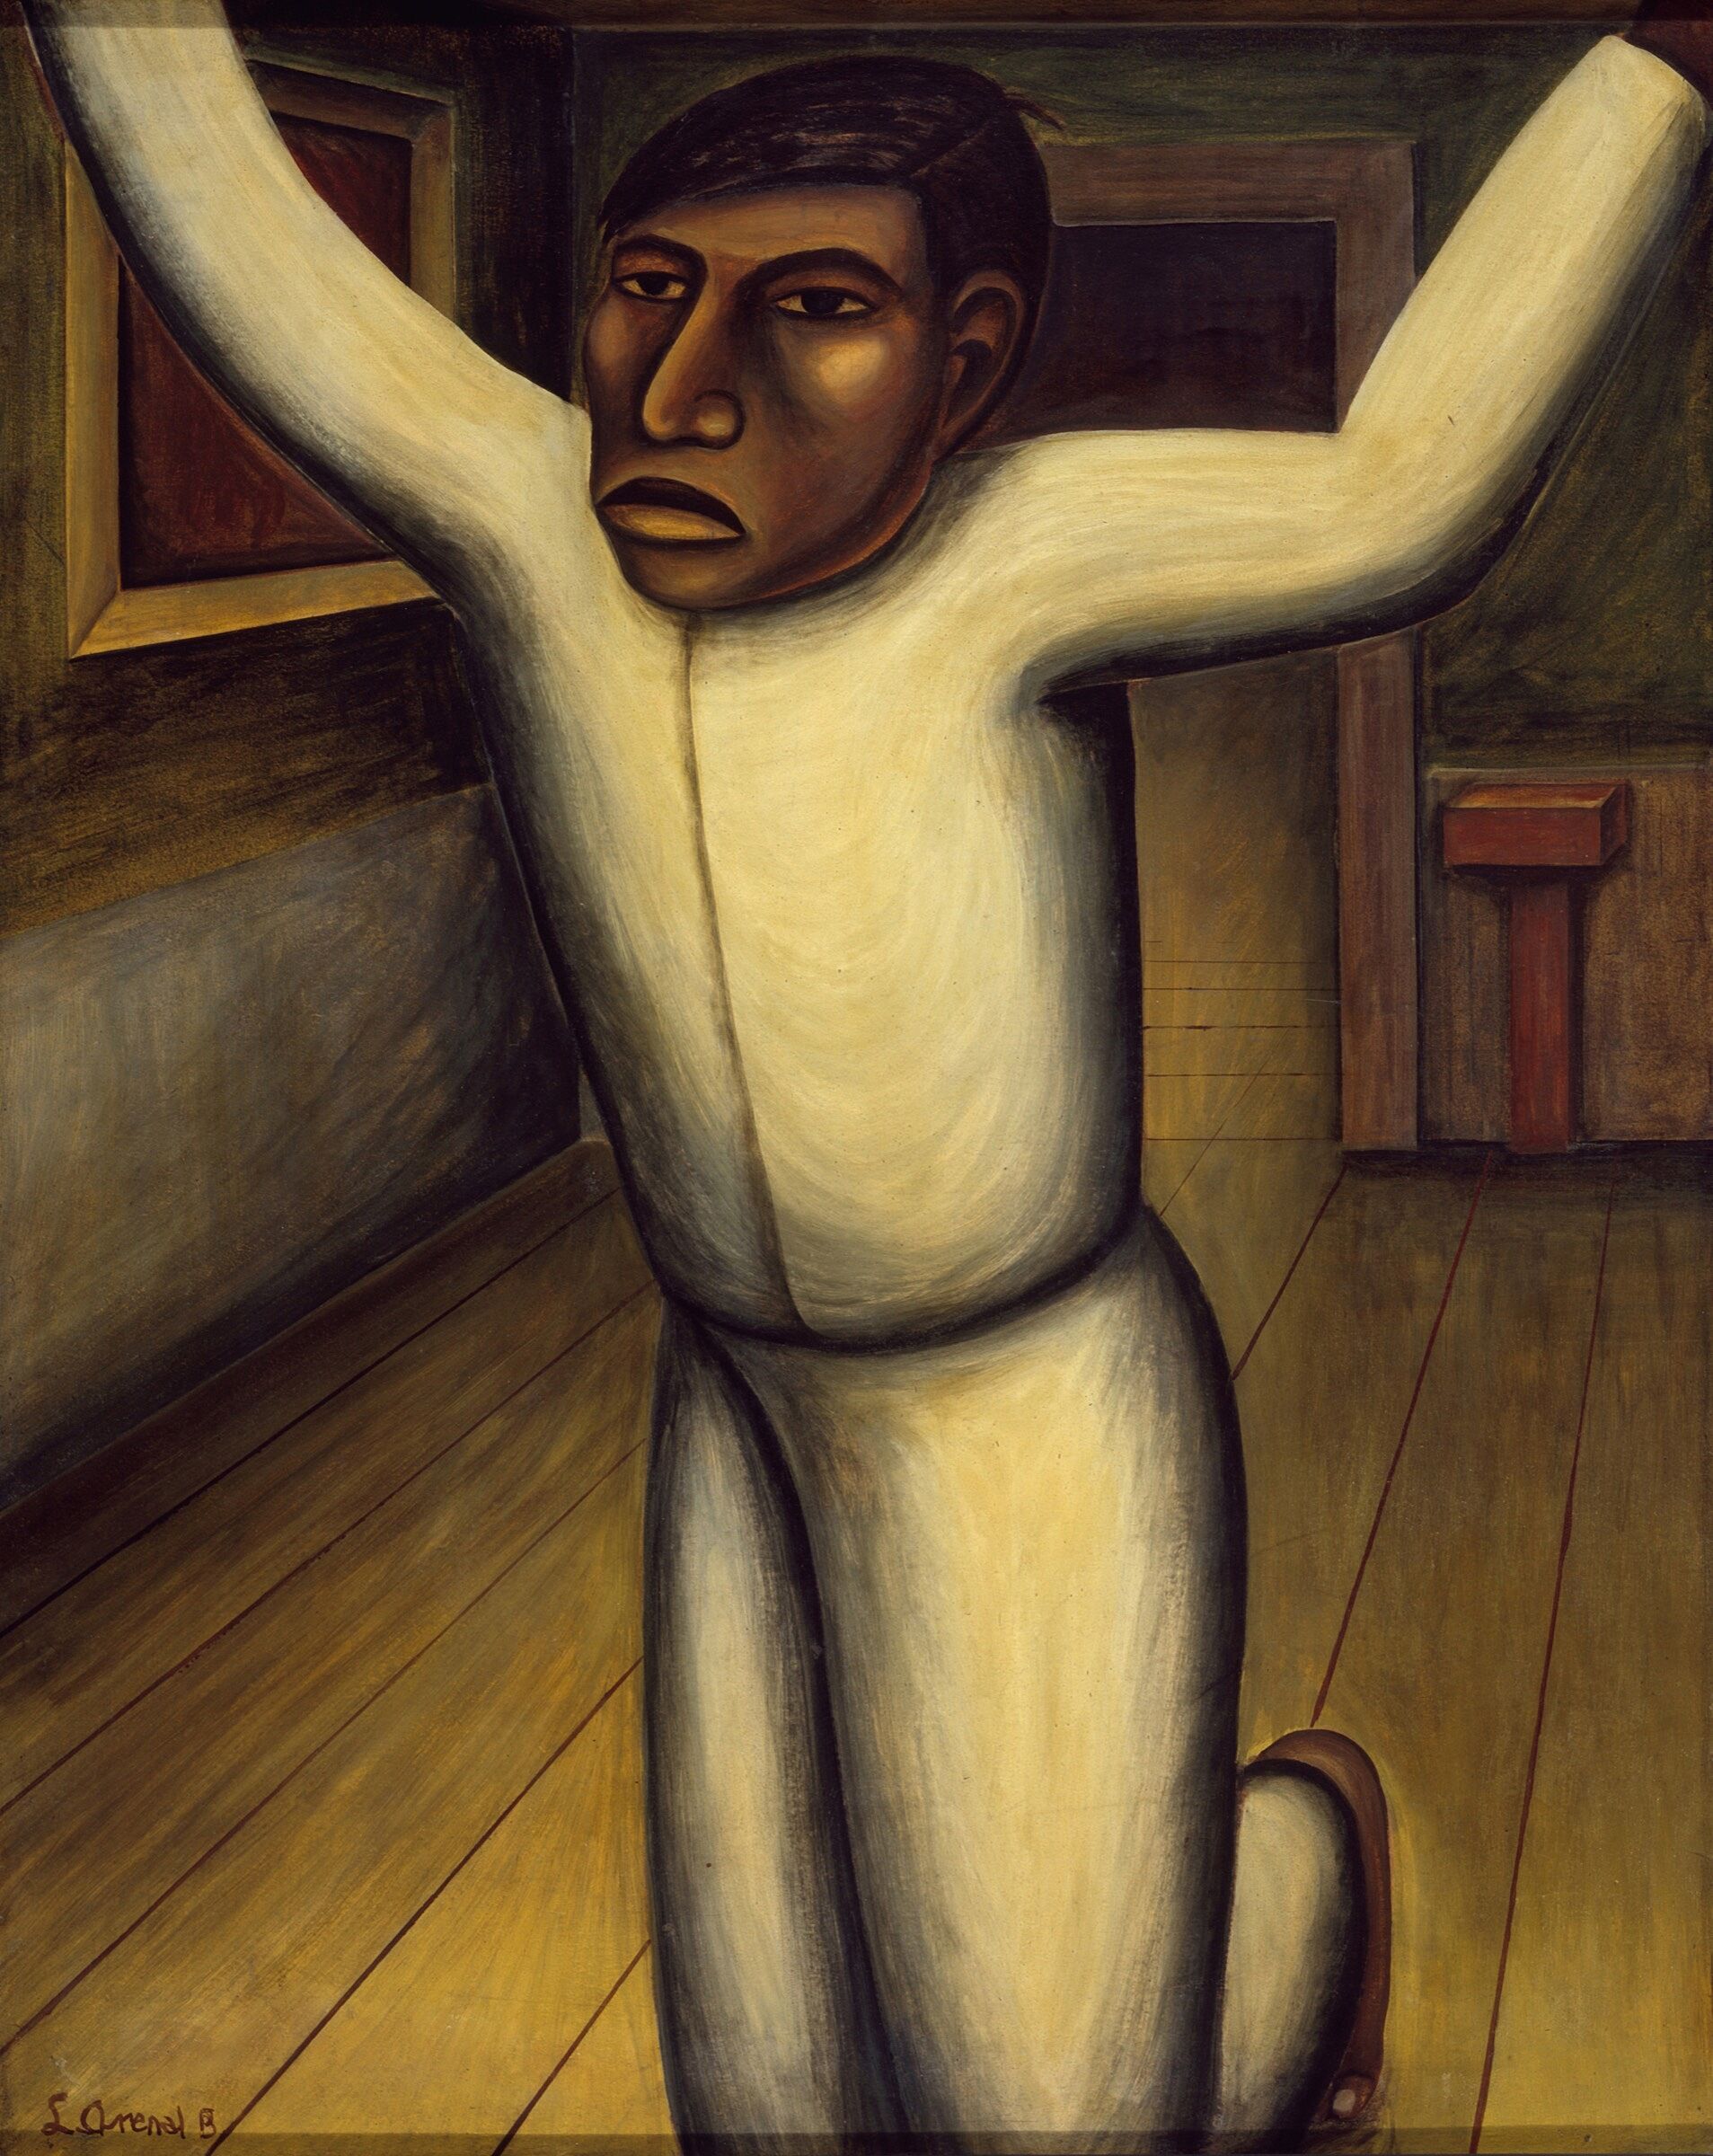 A painting of a man on his knees with his hands in the air.